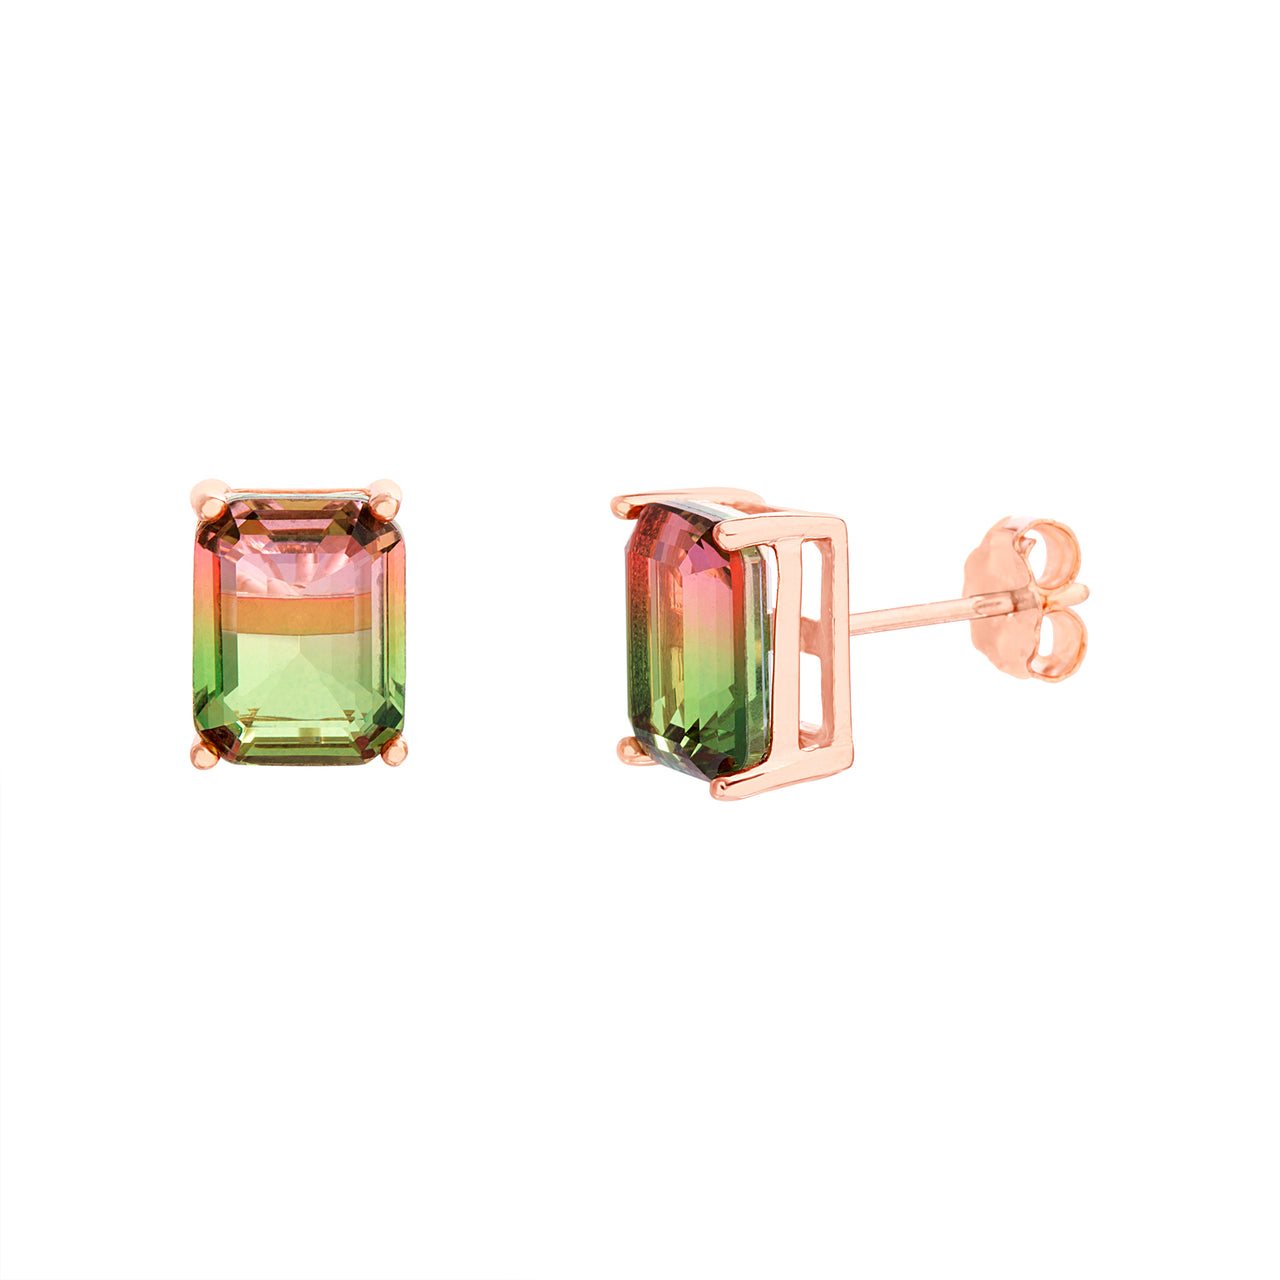 Lesa Michele Simulated Watermelon Tourmaline Rectangular Stud Earrings in Rose Gold Plated Sterling Silver